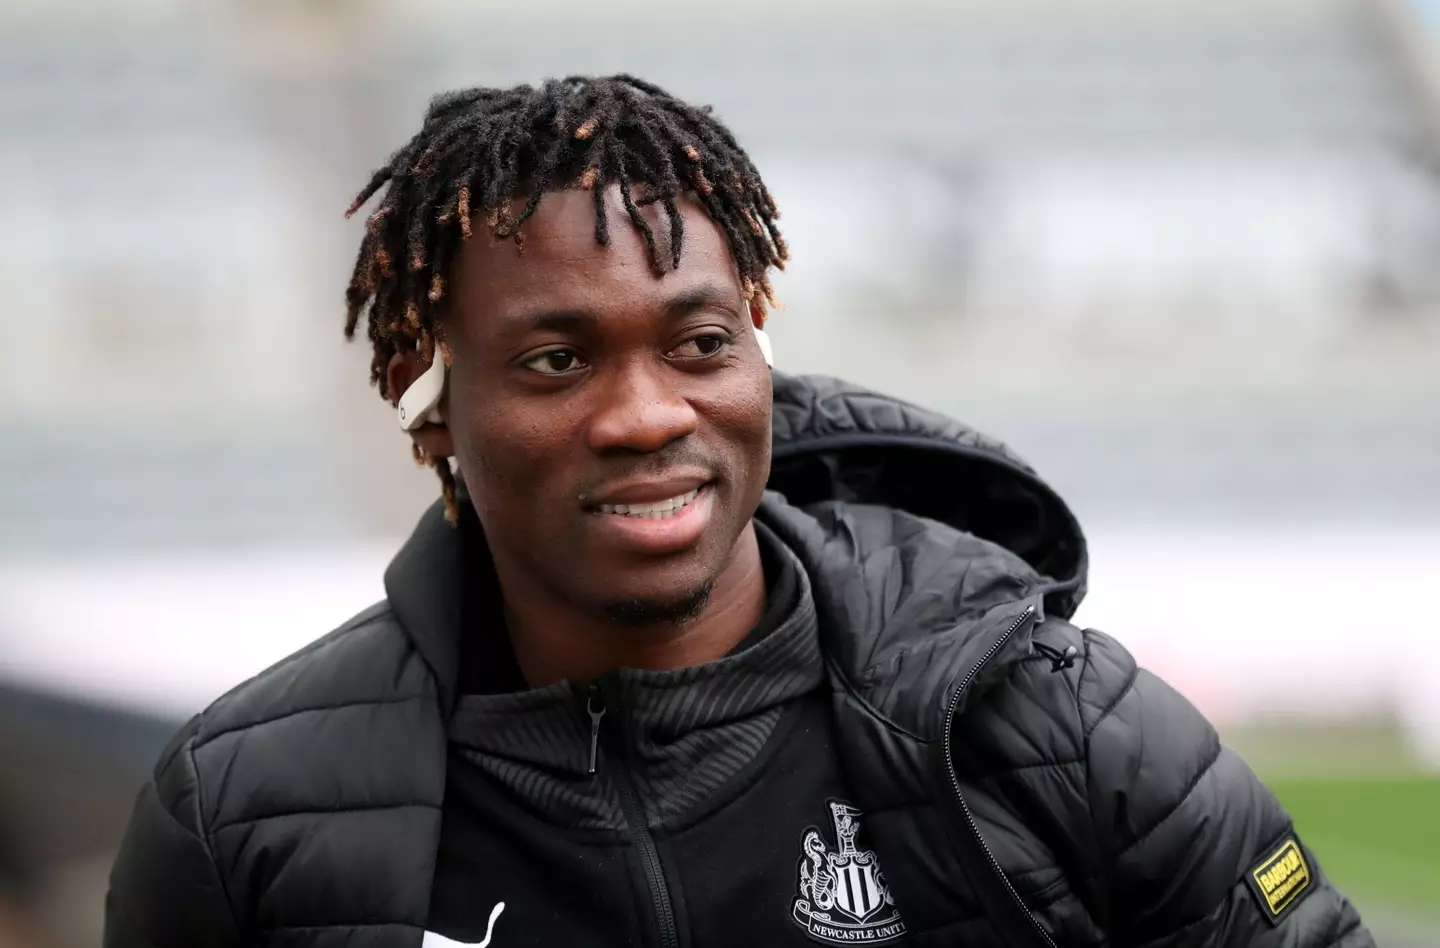 Atsu during his time at Newcastle United. (Image